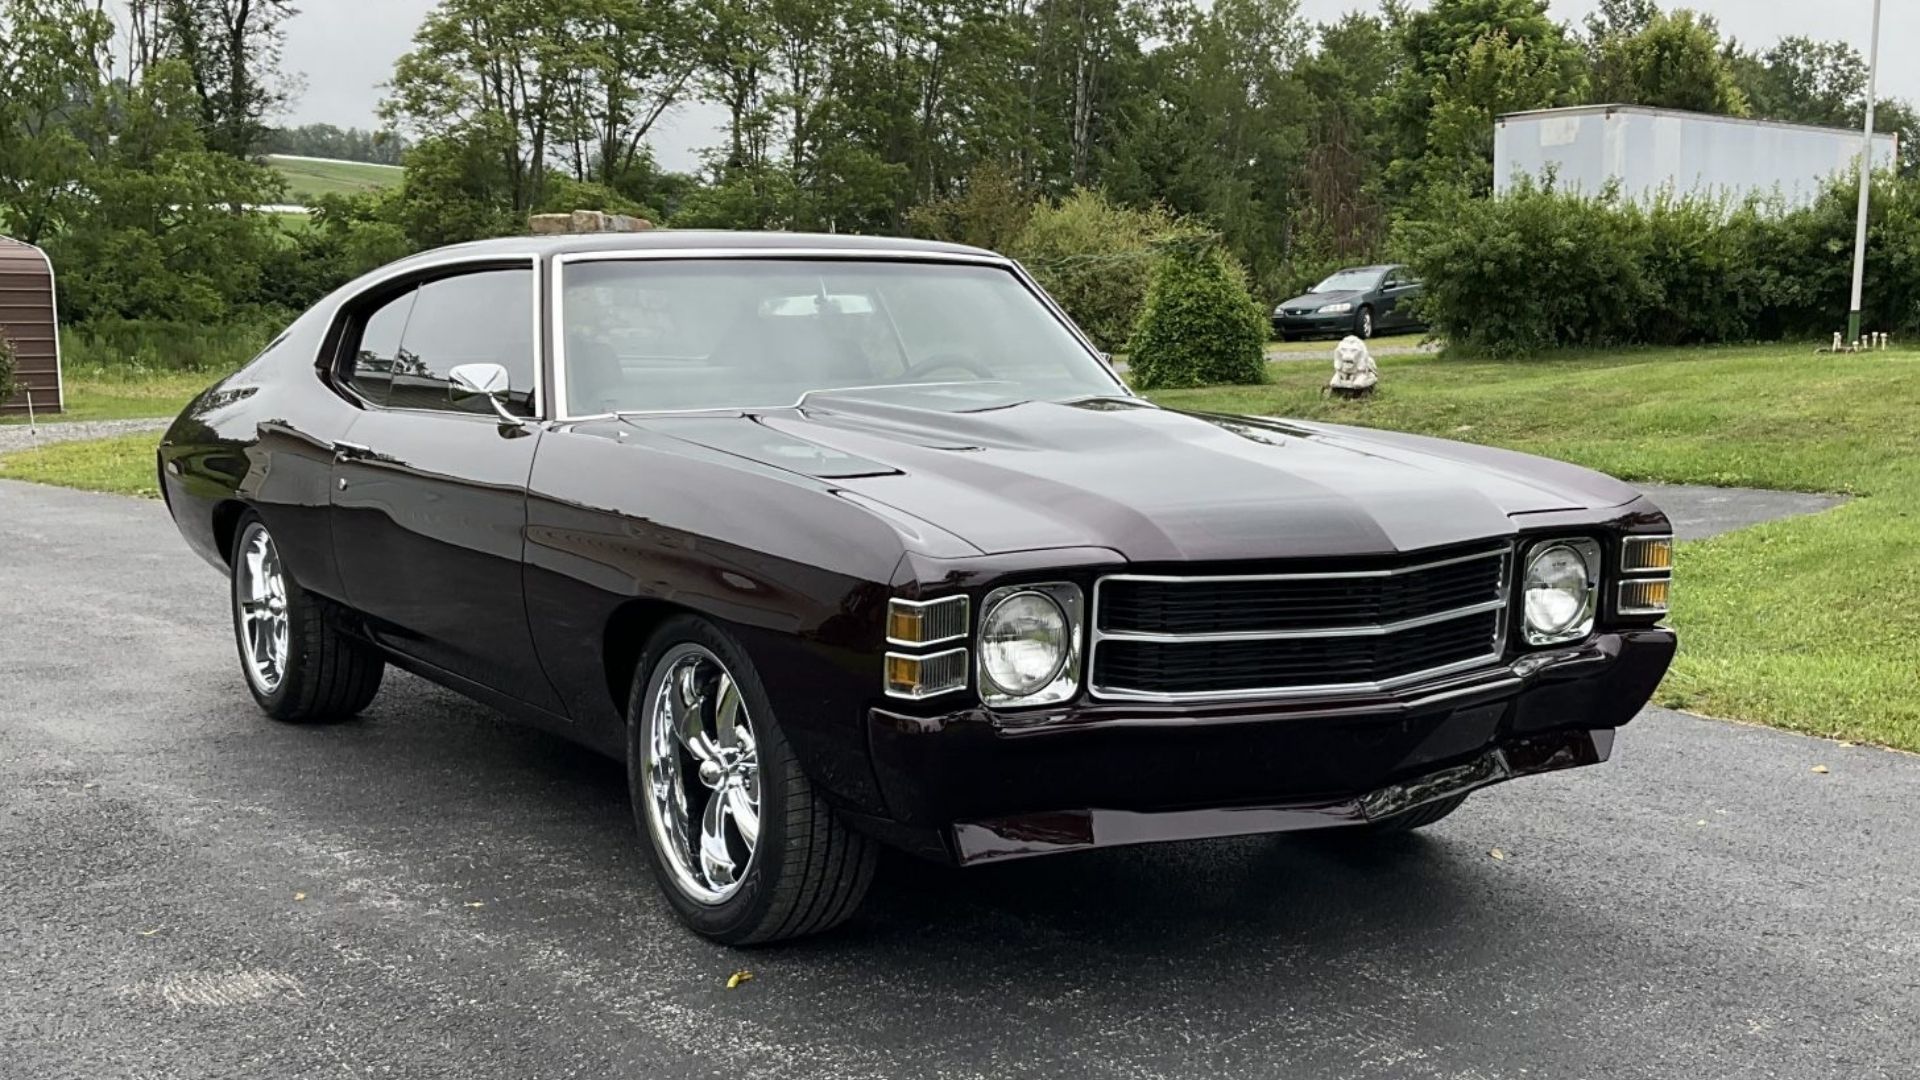 1971 Chevrolet Chevelle in black front and side view